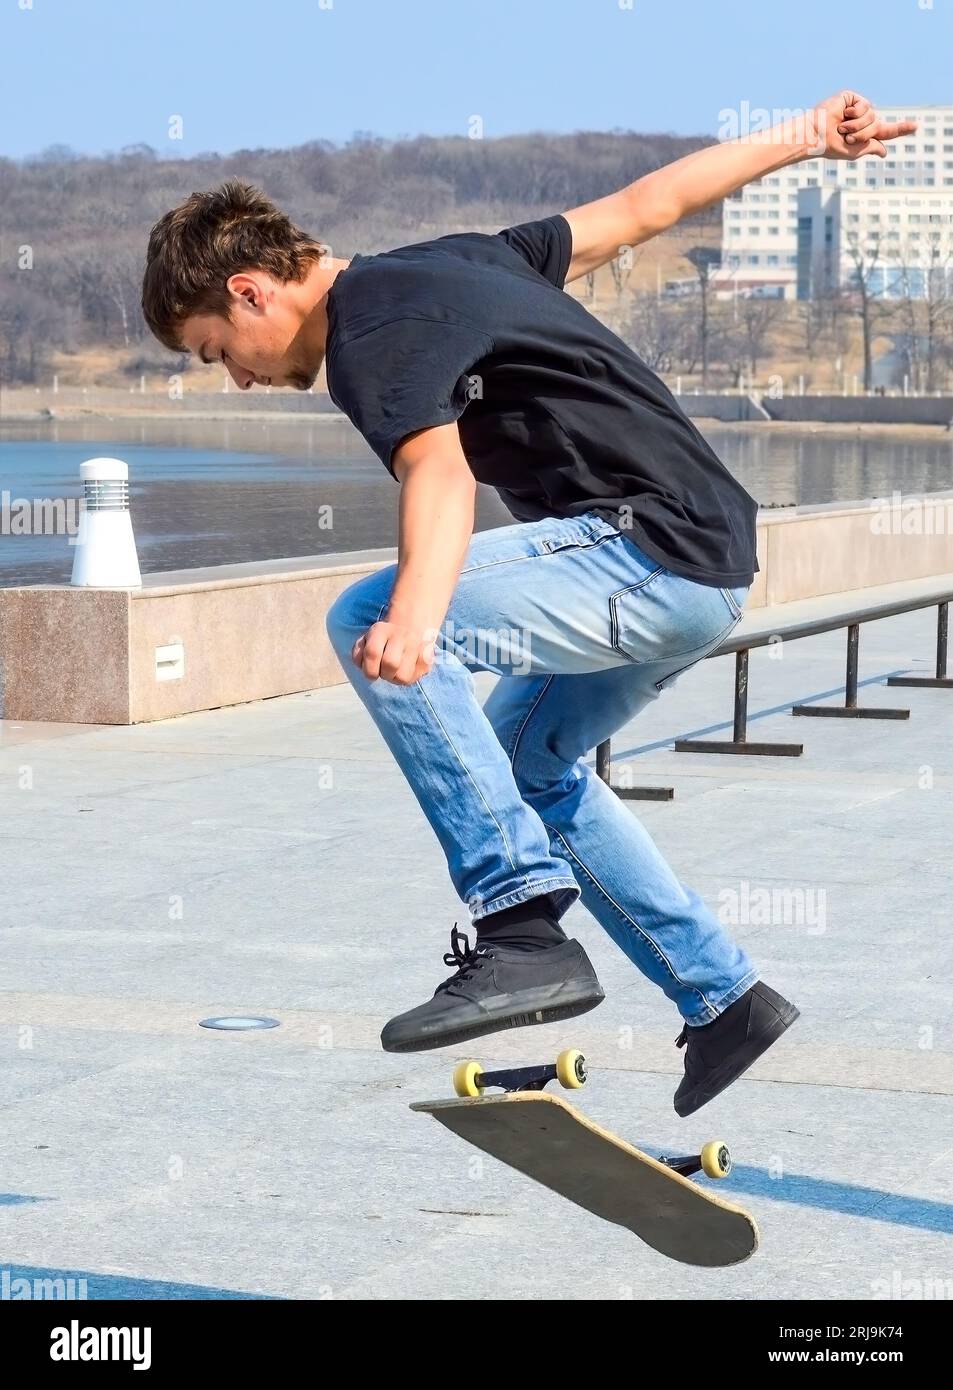 Young Russian skater in black t-shirt and blue jeans jumping on the skateboard on a early spring day Stock Photo